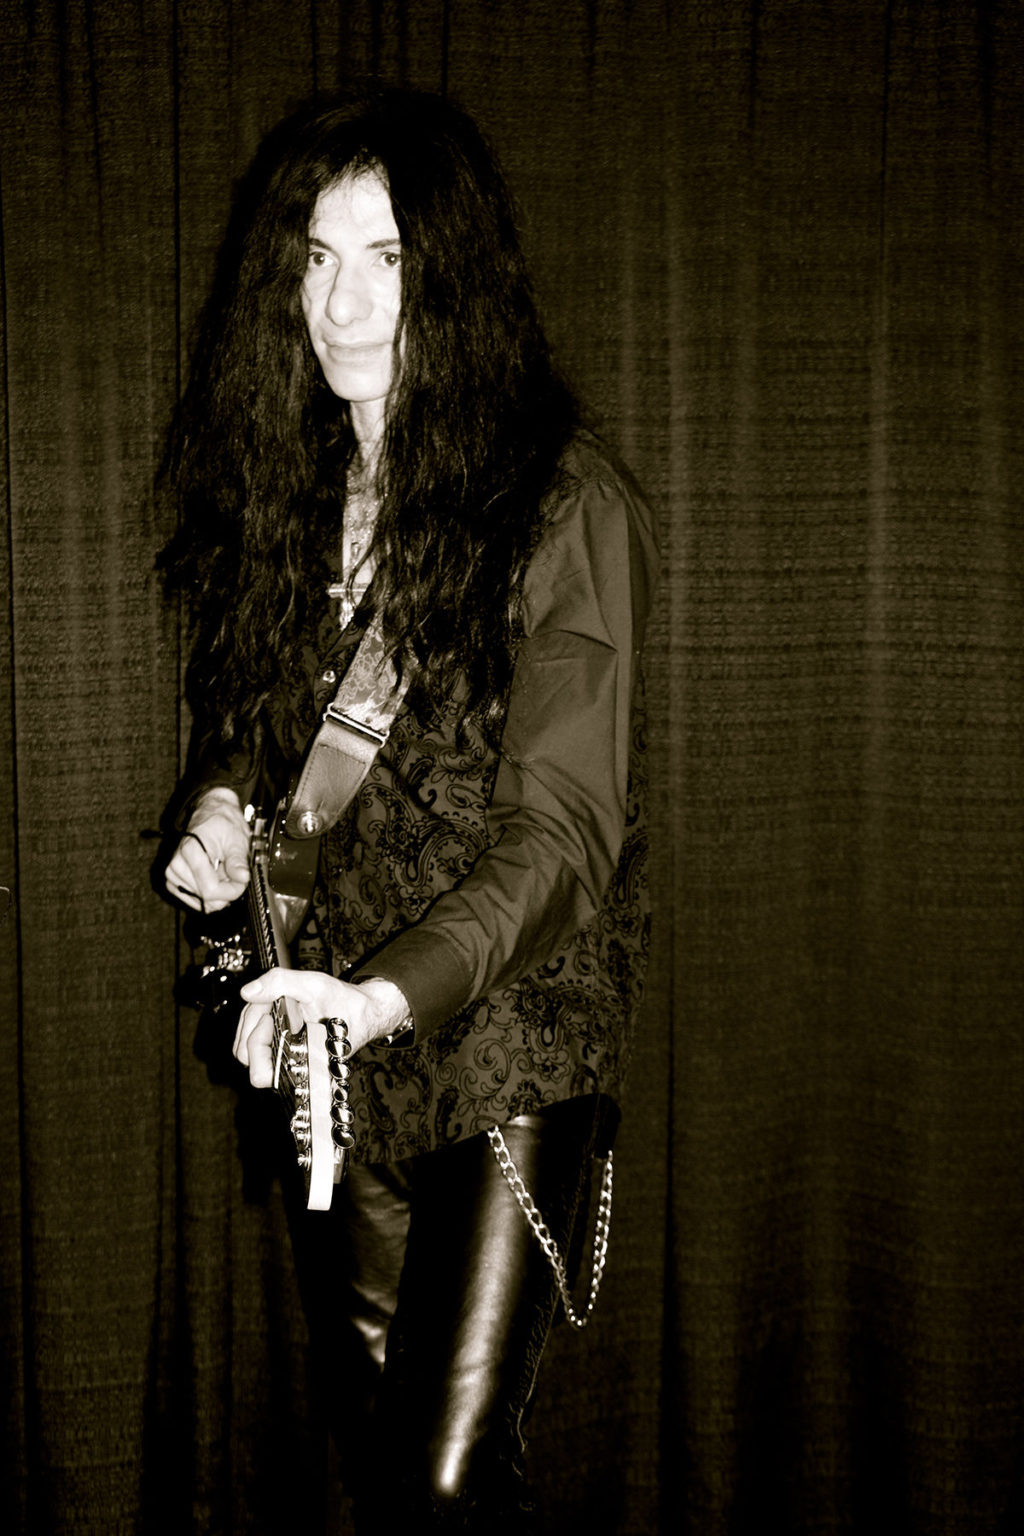 Mike Campese NAMM 2017, Photo by Terry Bert.